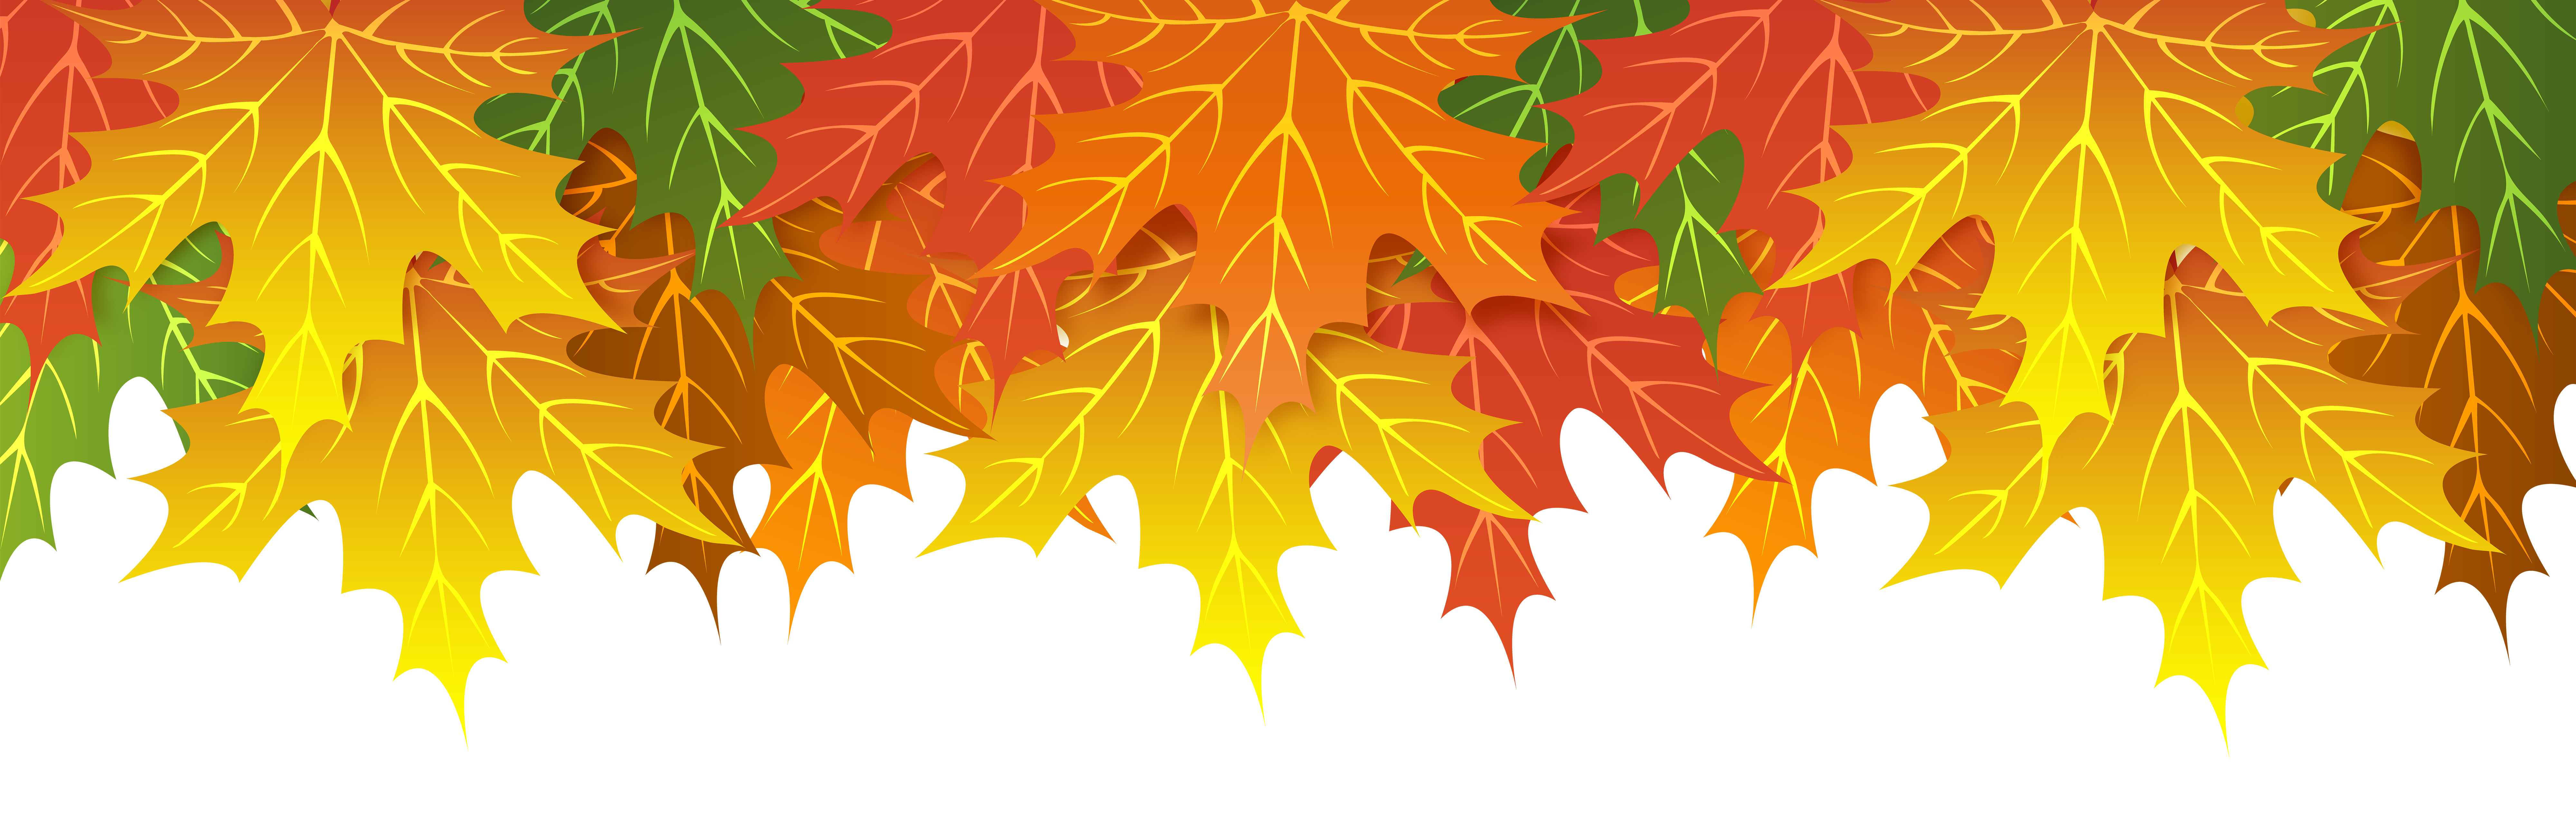 fall-leaves-upper-border-png-clip-art-image-gallery-yopriceville